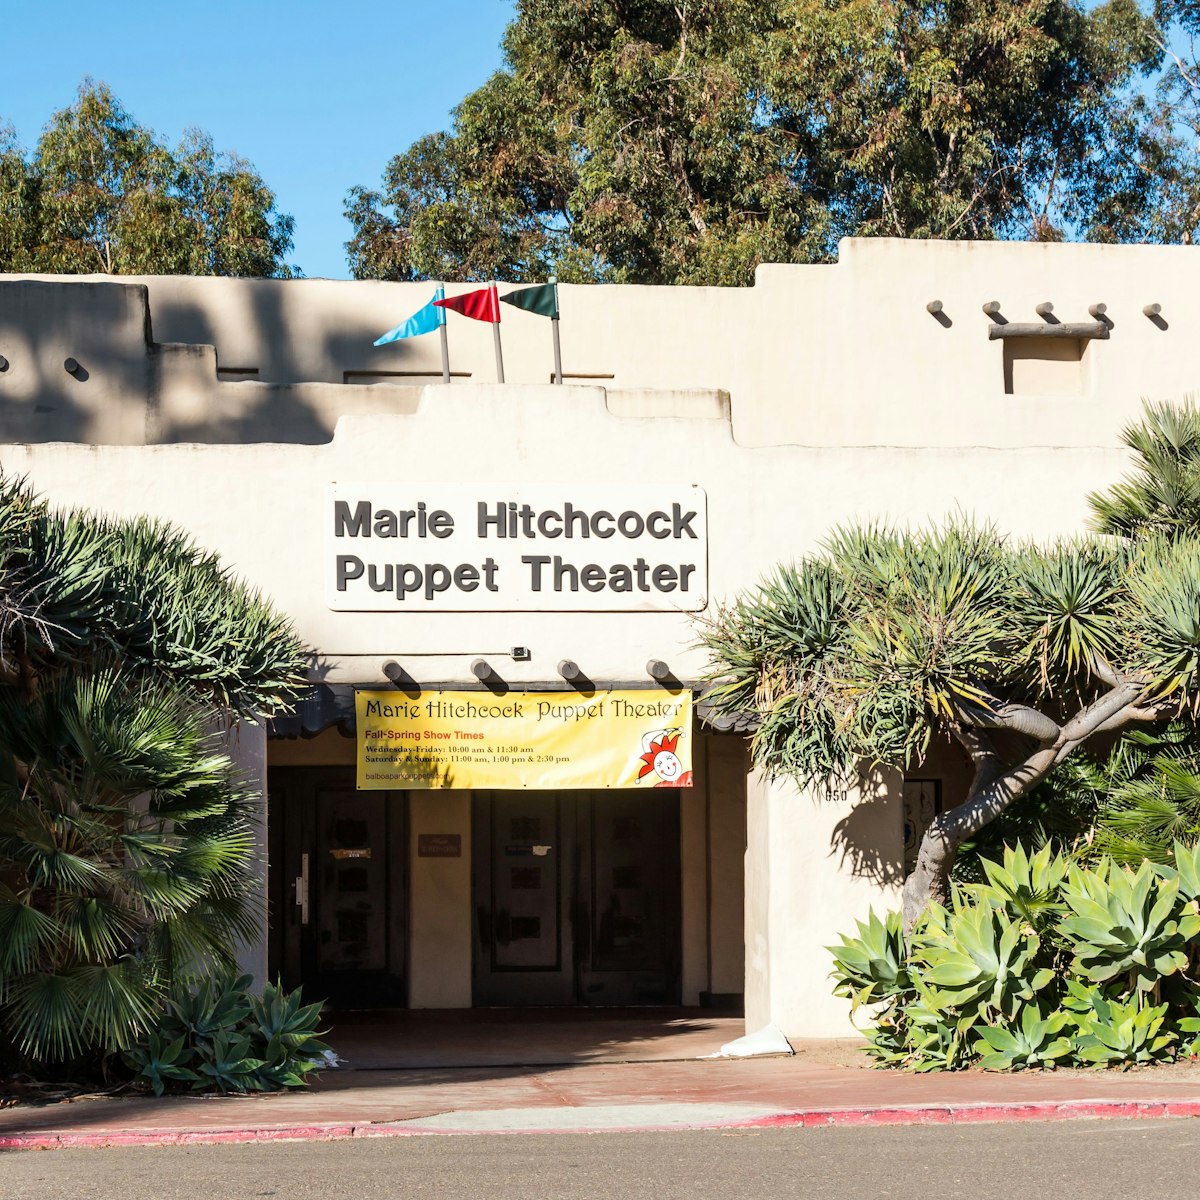 SAN DIEGO, CALIFORNIA - FEBRUARY 17, 2018:  The Marie Hitchcock Puppet Theater in Balboa Park, North America's longest continually-running puppet theater, with shows beginning in 1945 after WWII.; Shutterstock ID 1027095214; your: Bridget Brown; gl: 65050; netsuite: Online Editorial; full: POI Image Update